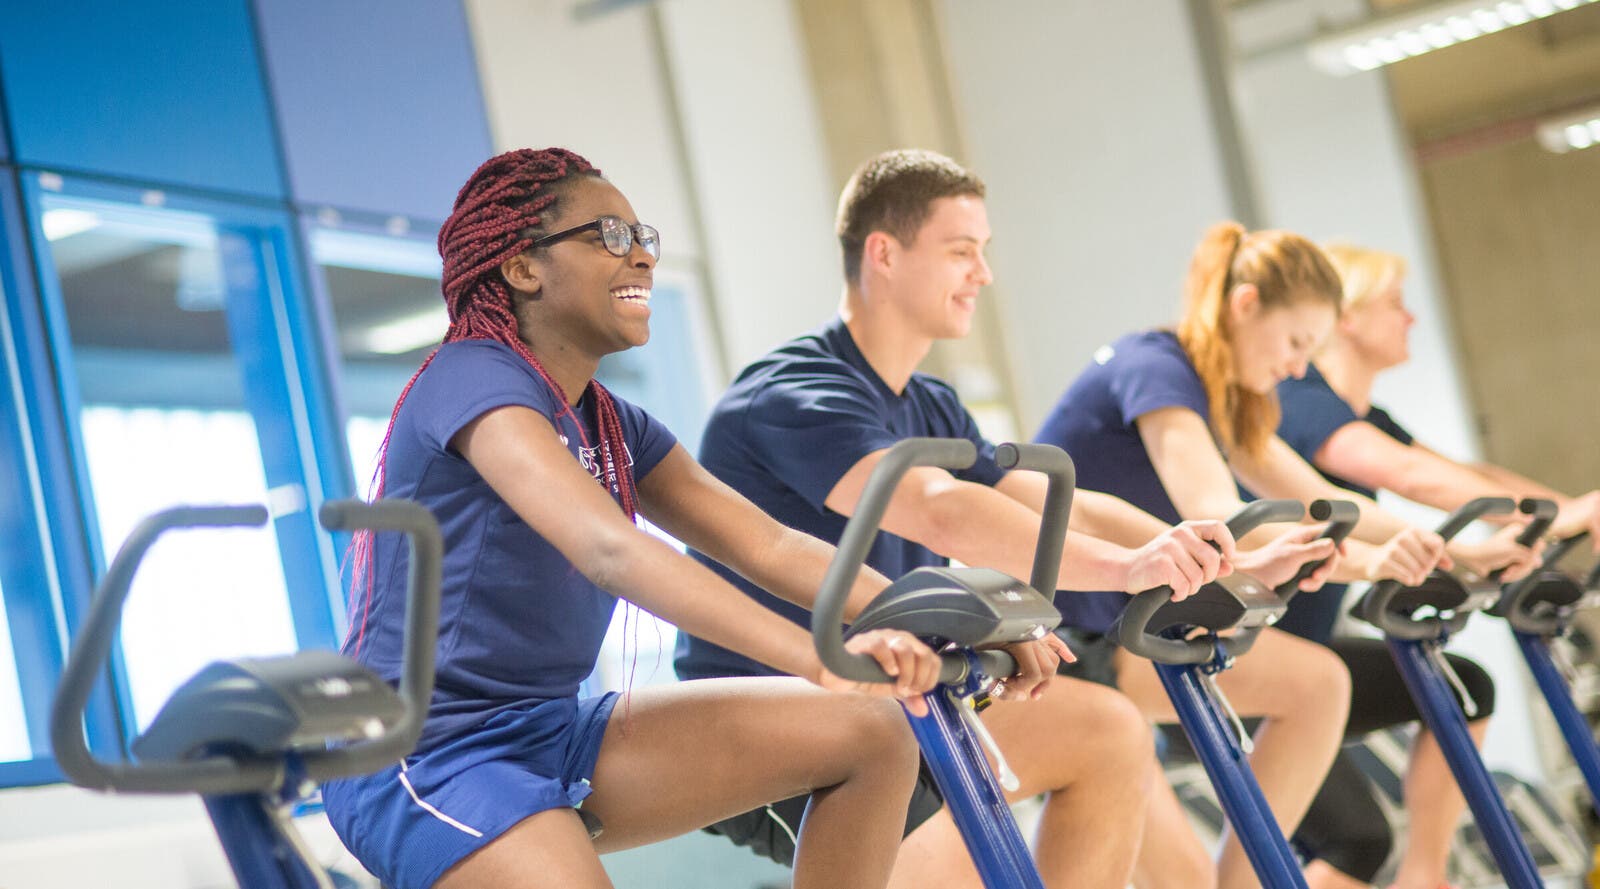 Sport science students on exercise bikes